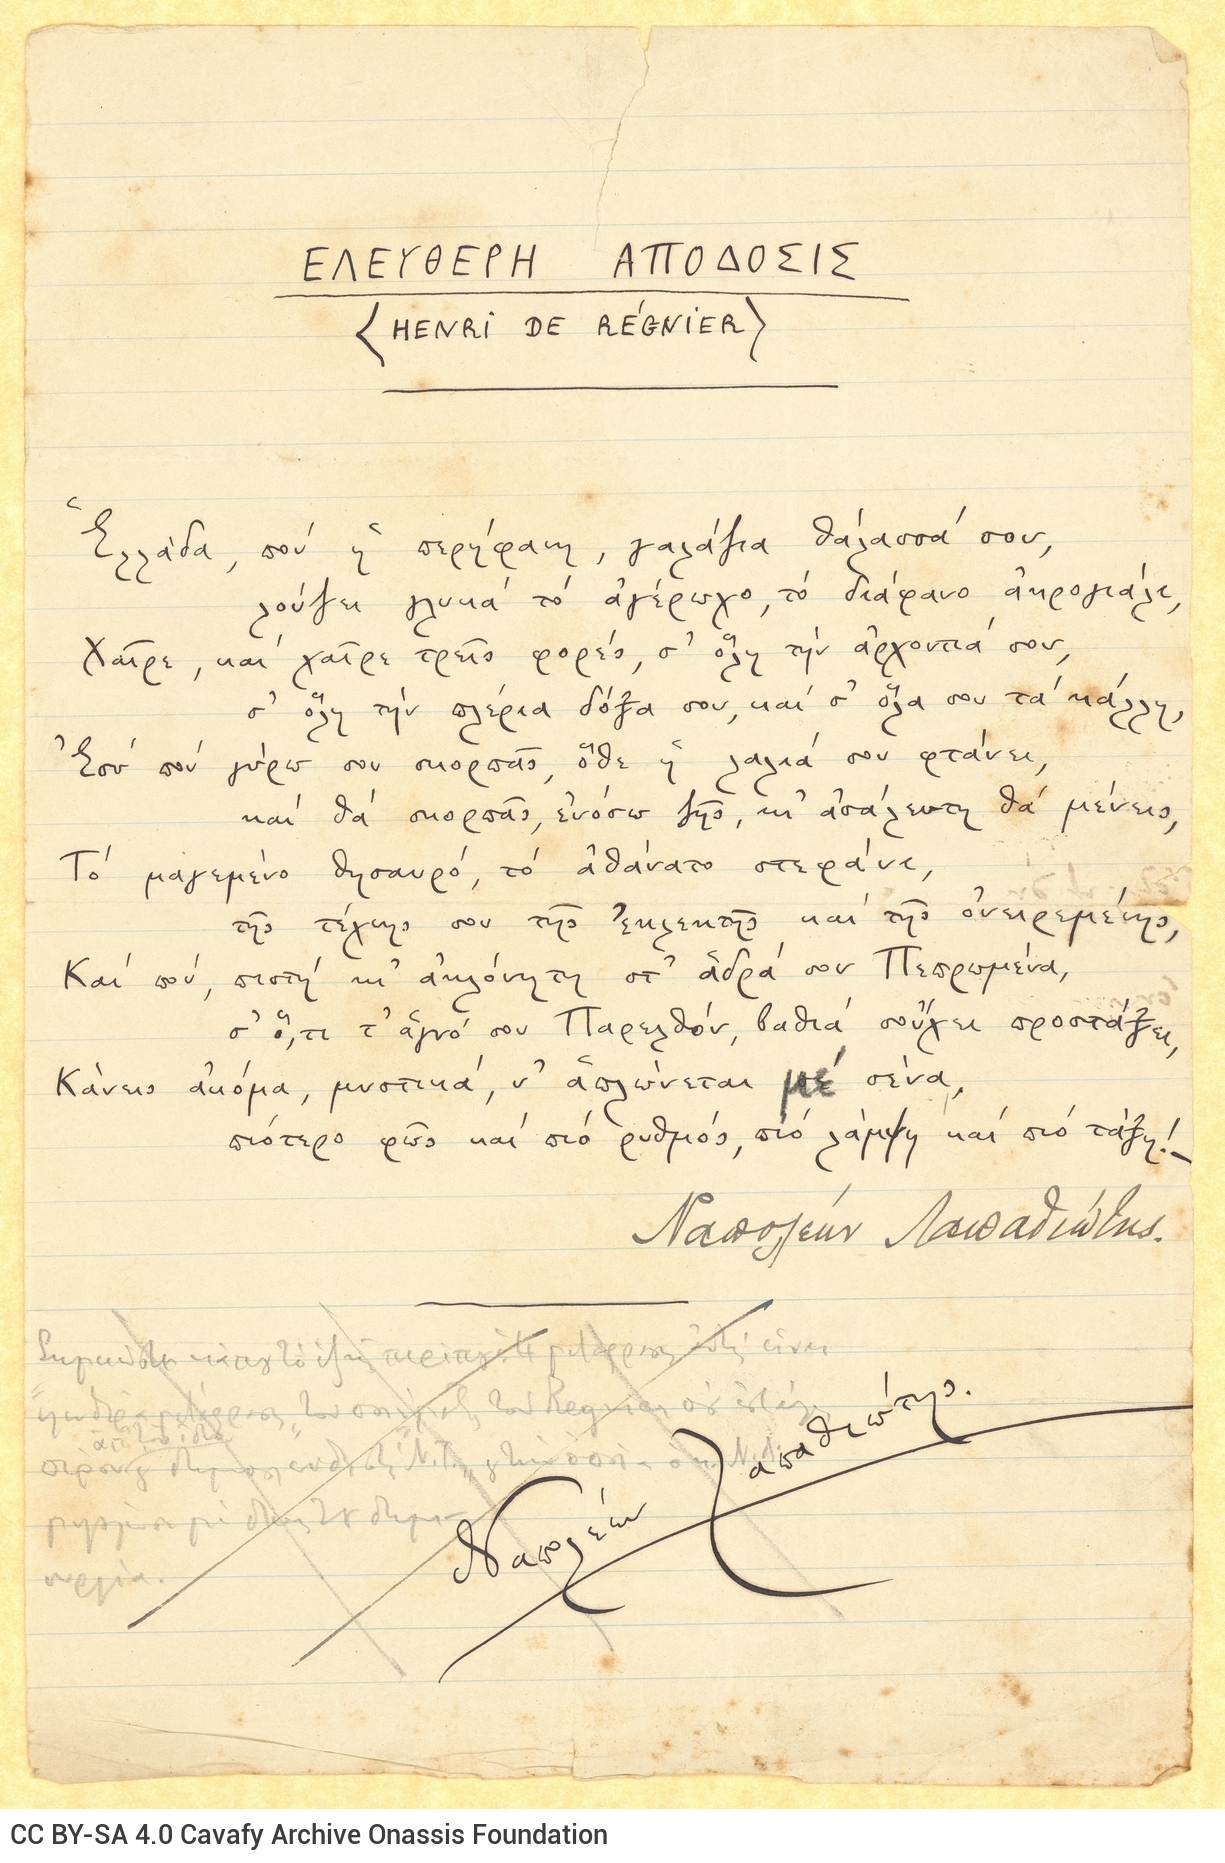 Handwritten poem and note in the margin. The main text, as is clarified in the note, is a translation of Henri de Régnier's 